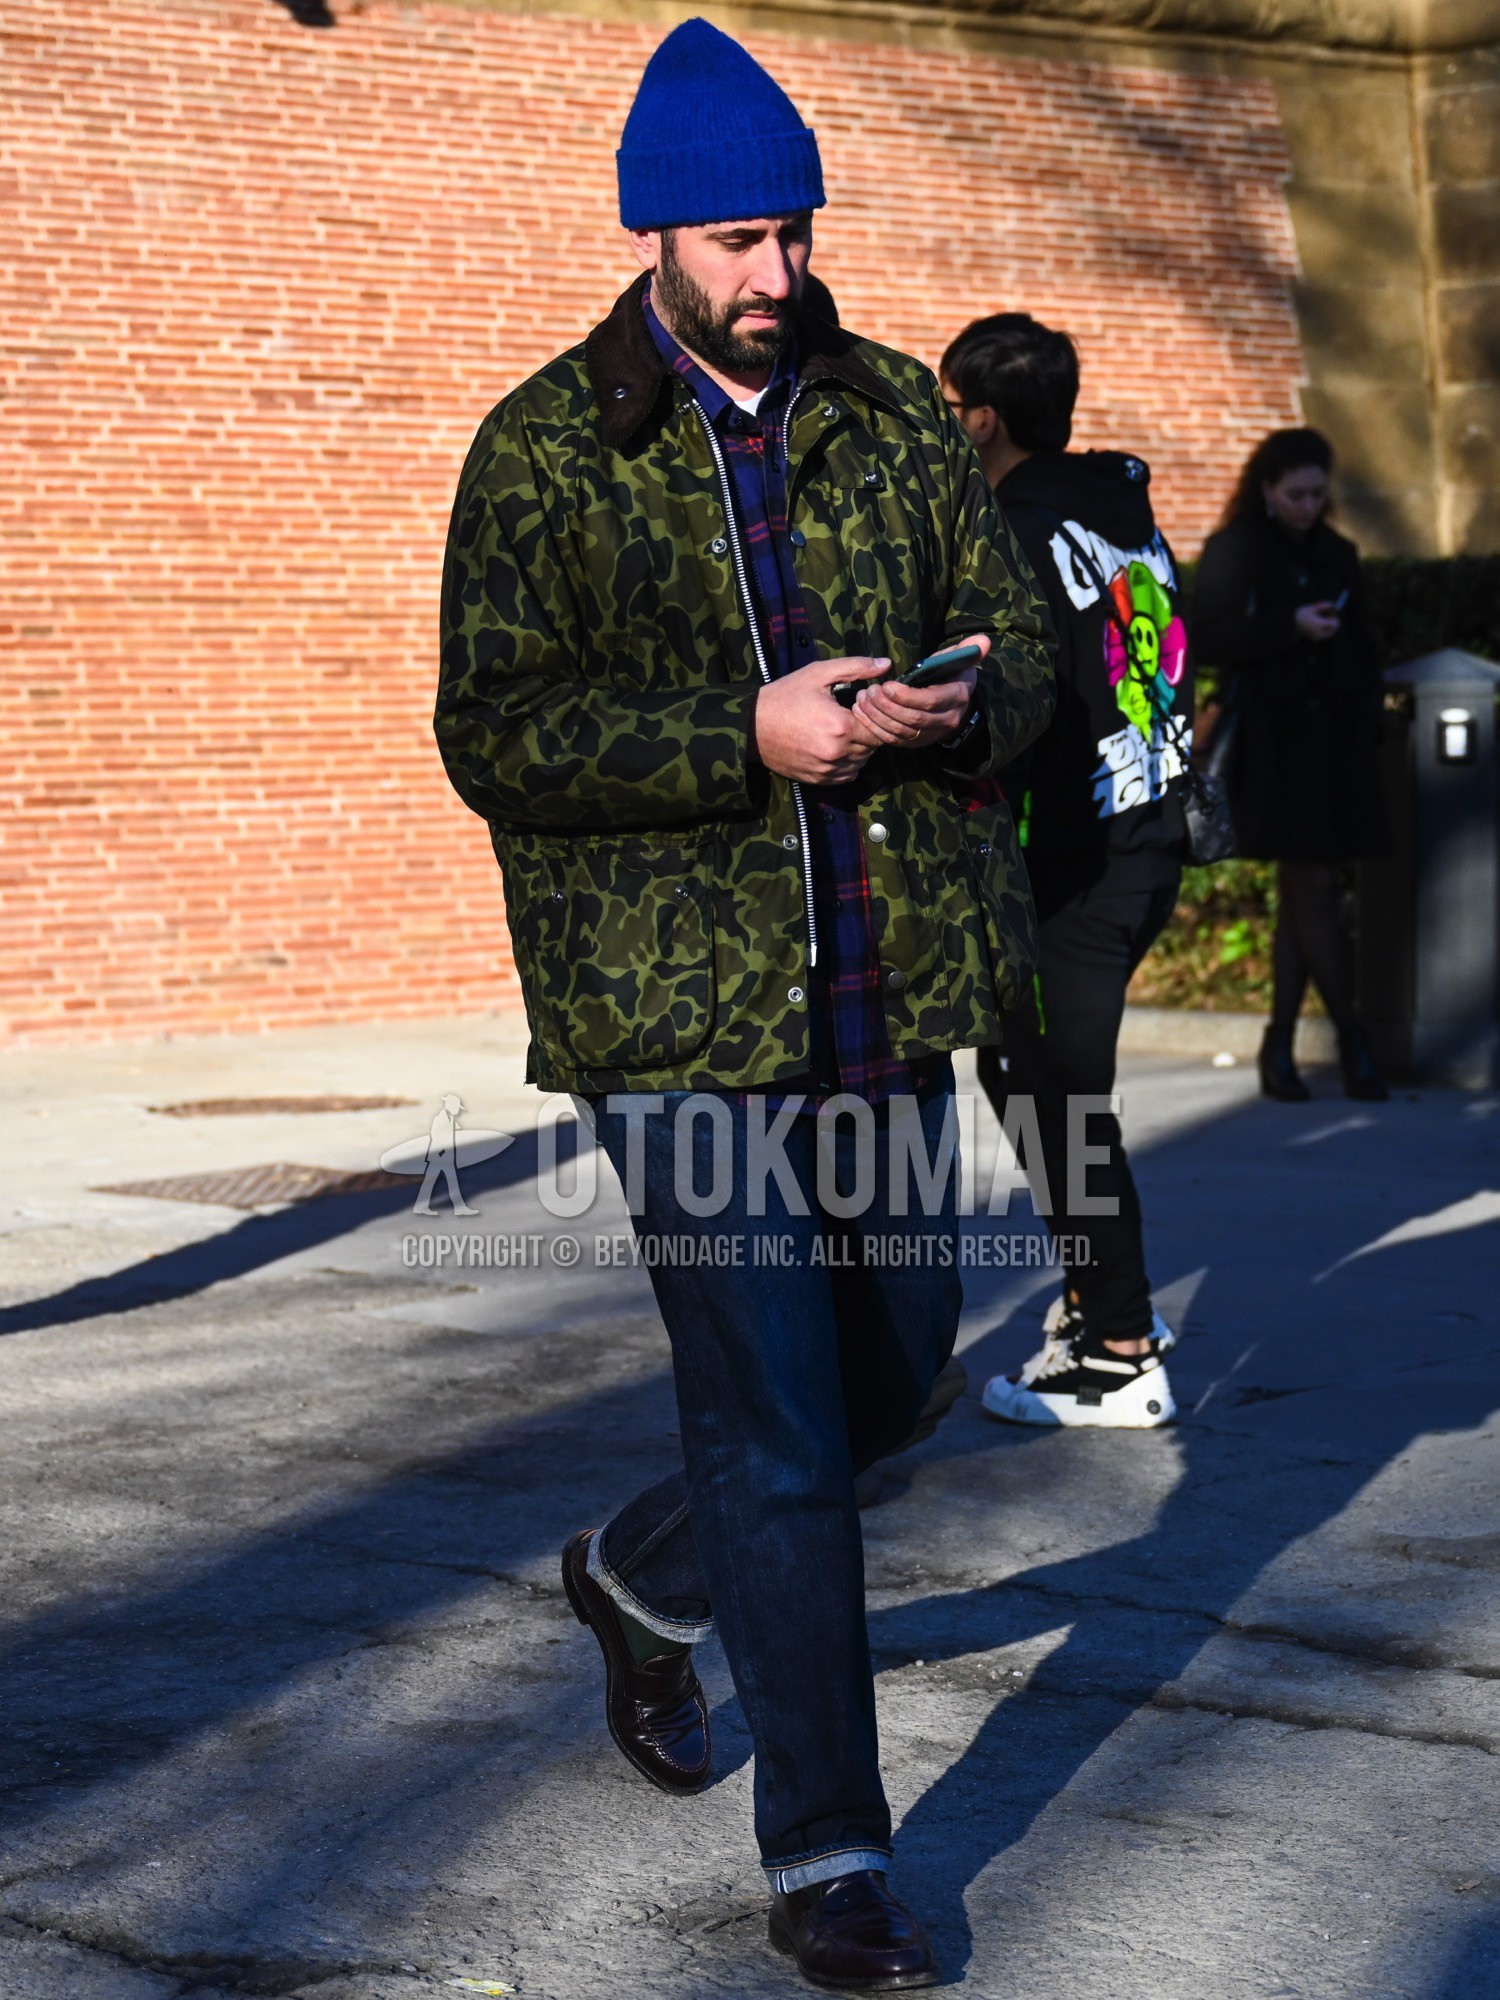 Men's autumn winter outfit with blue plain knit cap, olive green camouflage field jacket/hunting jacket, blue check shirt, white plain t-shirt, navy plain denim/jeans, green plain socks, brown coin loafers leather shoes.